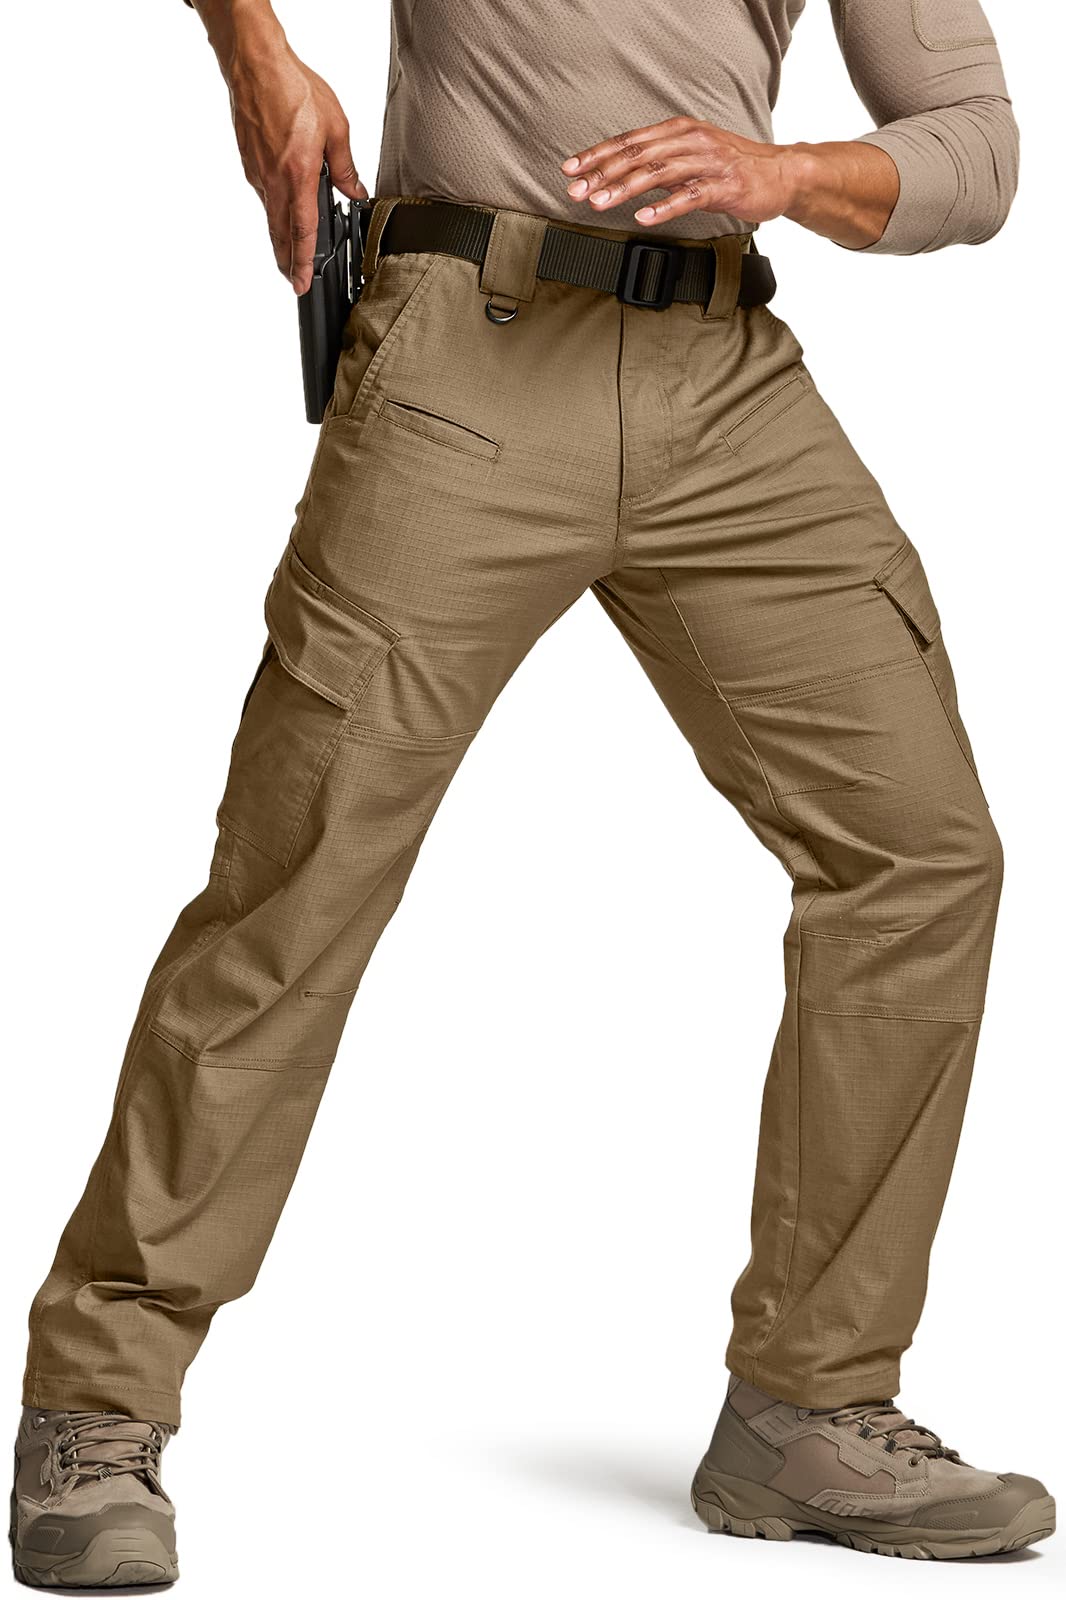 Men's Cotton Casual Relaxed Fit Straight Leg Cargo Pant Combat Work Pants  with 10 Pockets